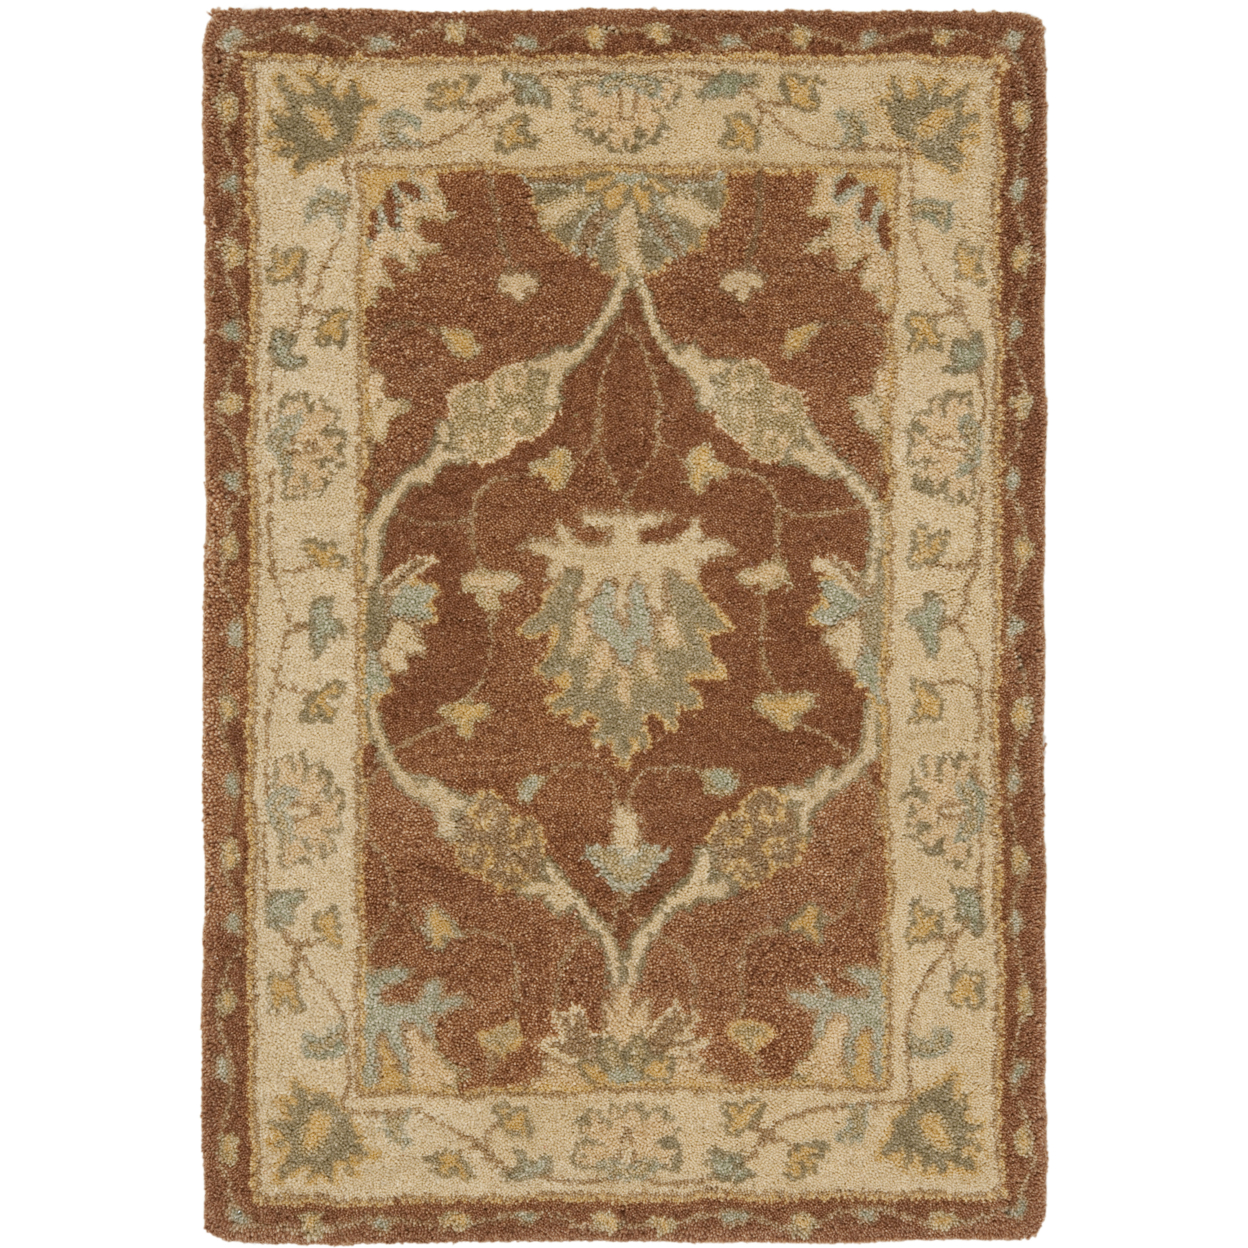 SAFAVIEH Antiquity AT315A Handmade Brown / Taupe Rug - 4' X 6'